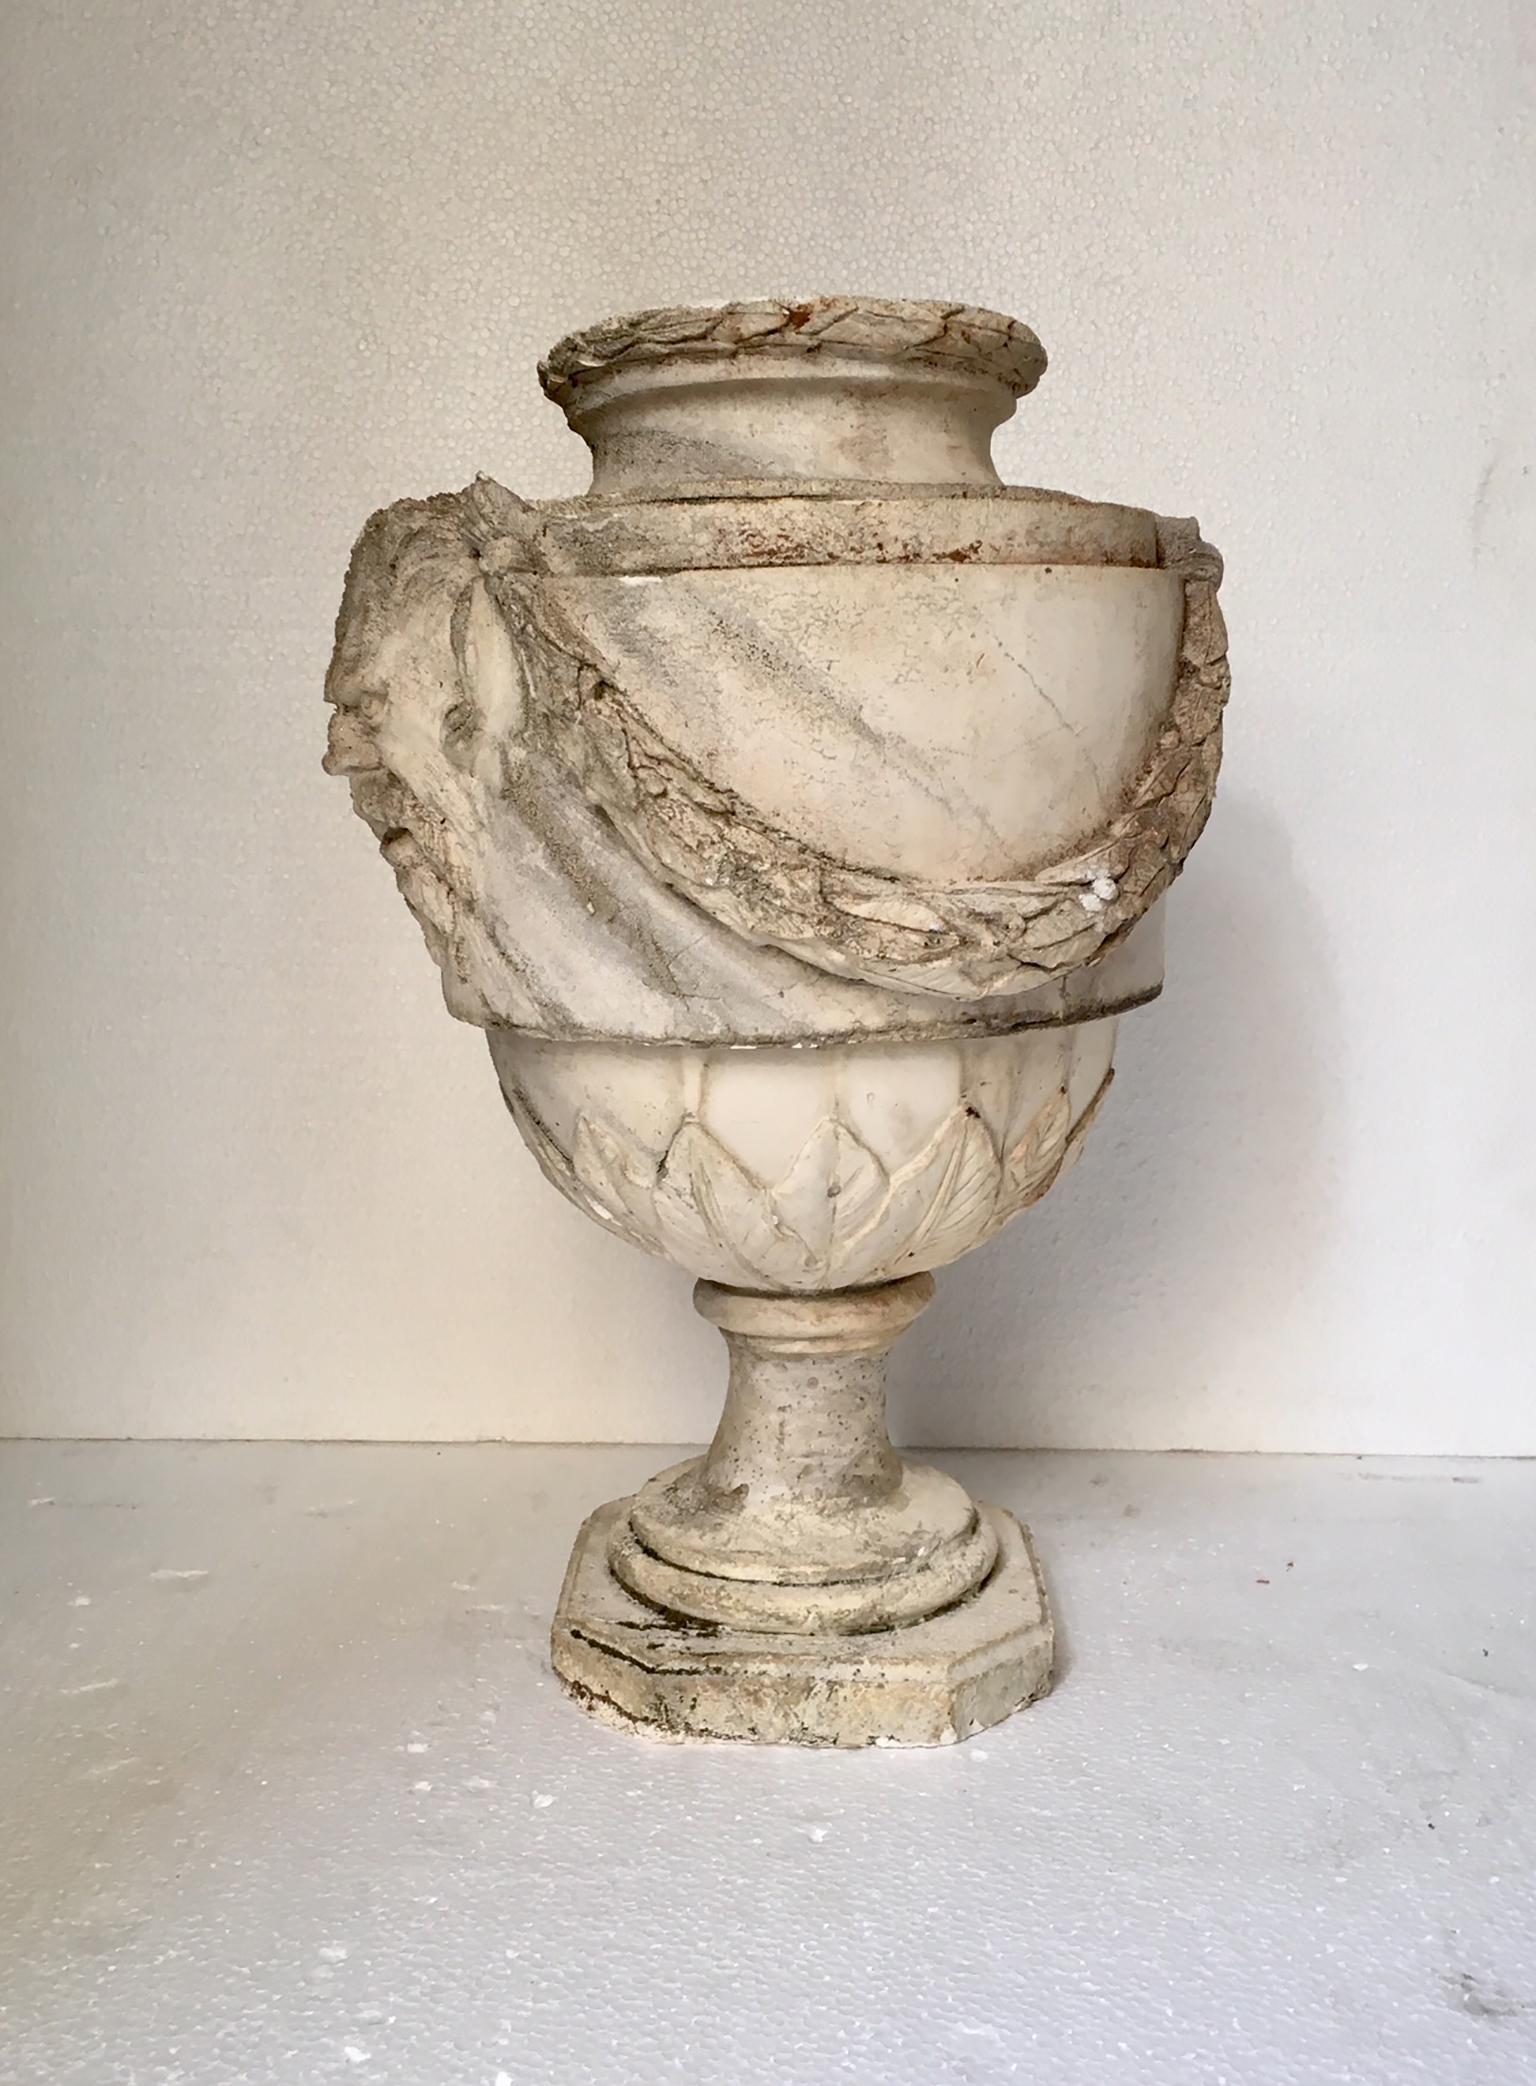 Large plaster vase in the style of antiquity, with decoration of vegetable garlands on the sides and heads of faun, is a very decorative element.